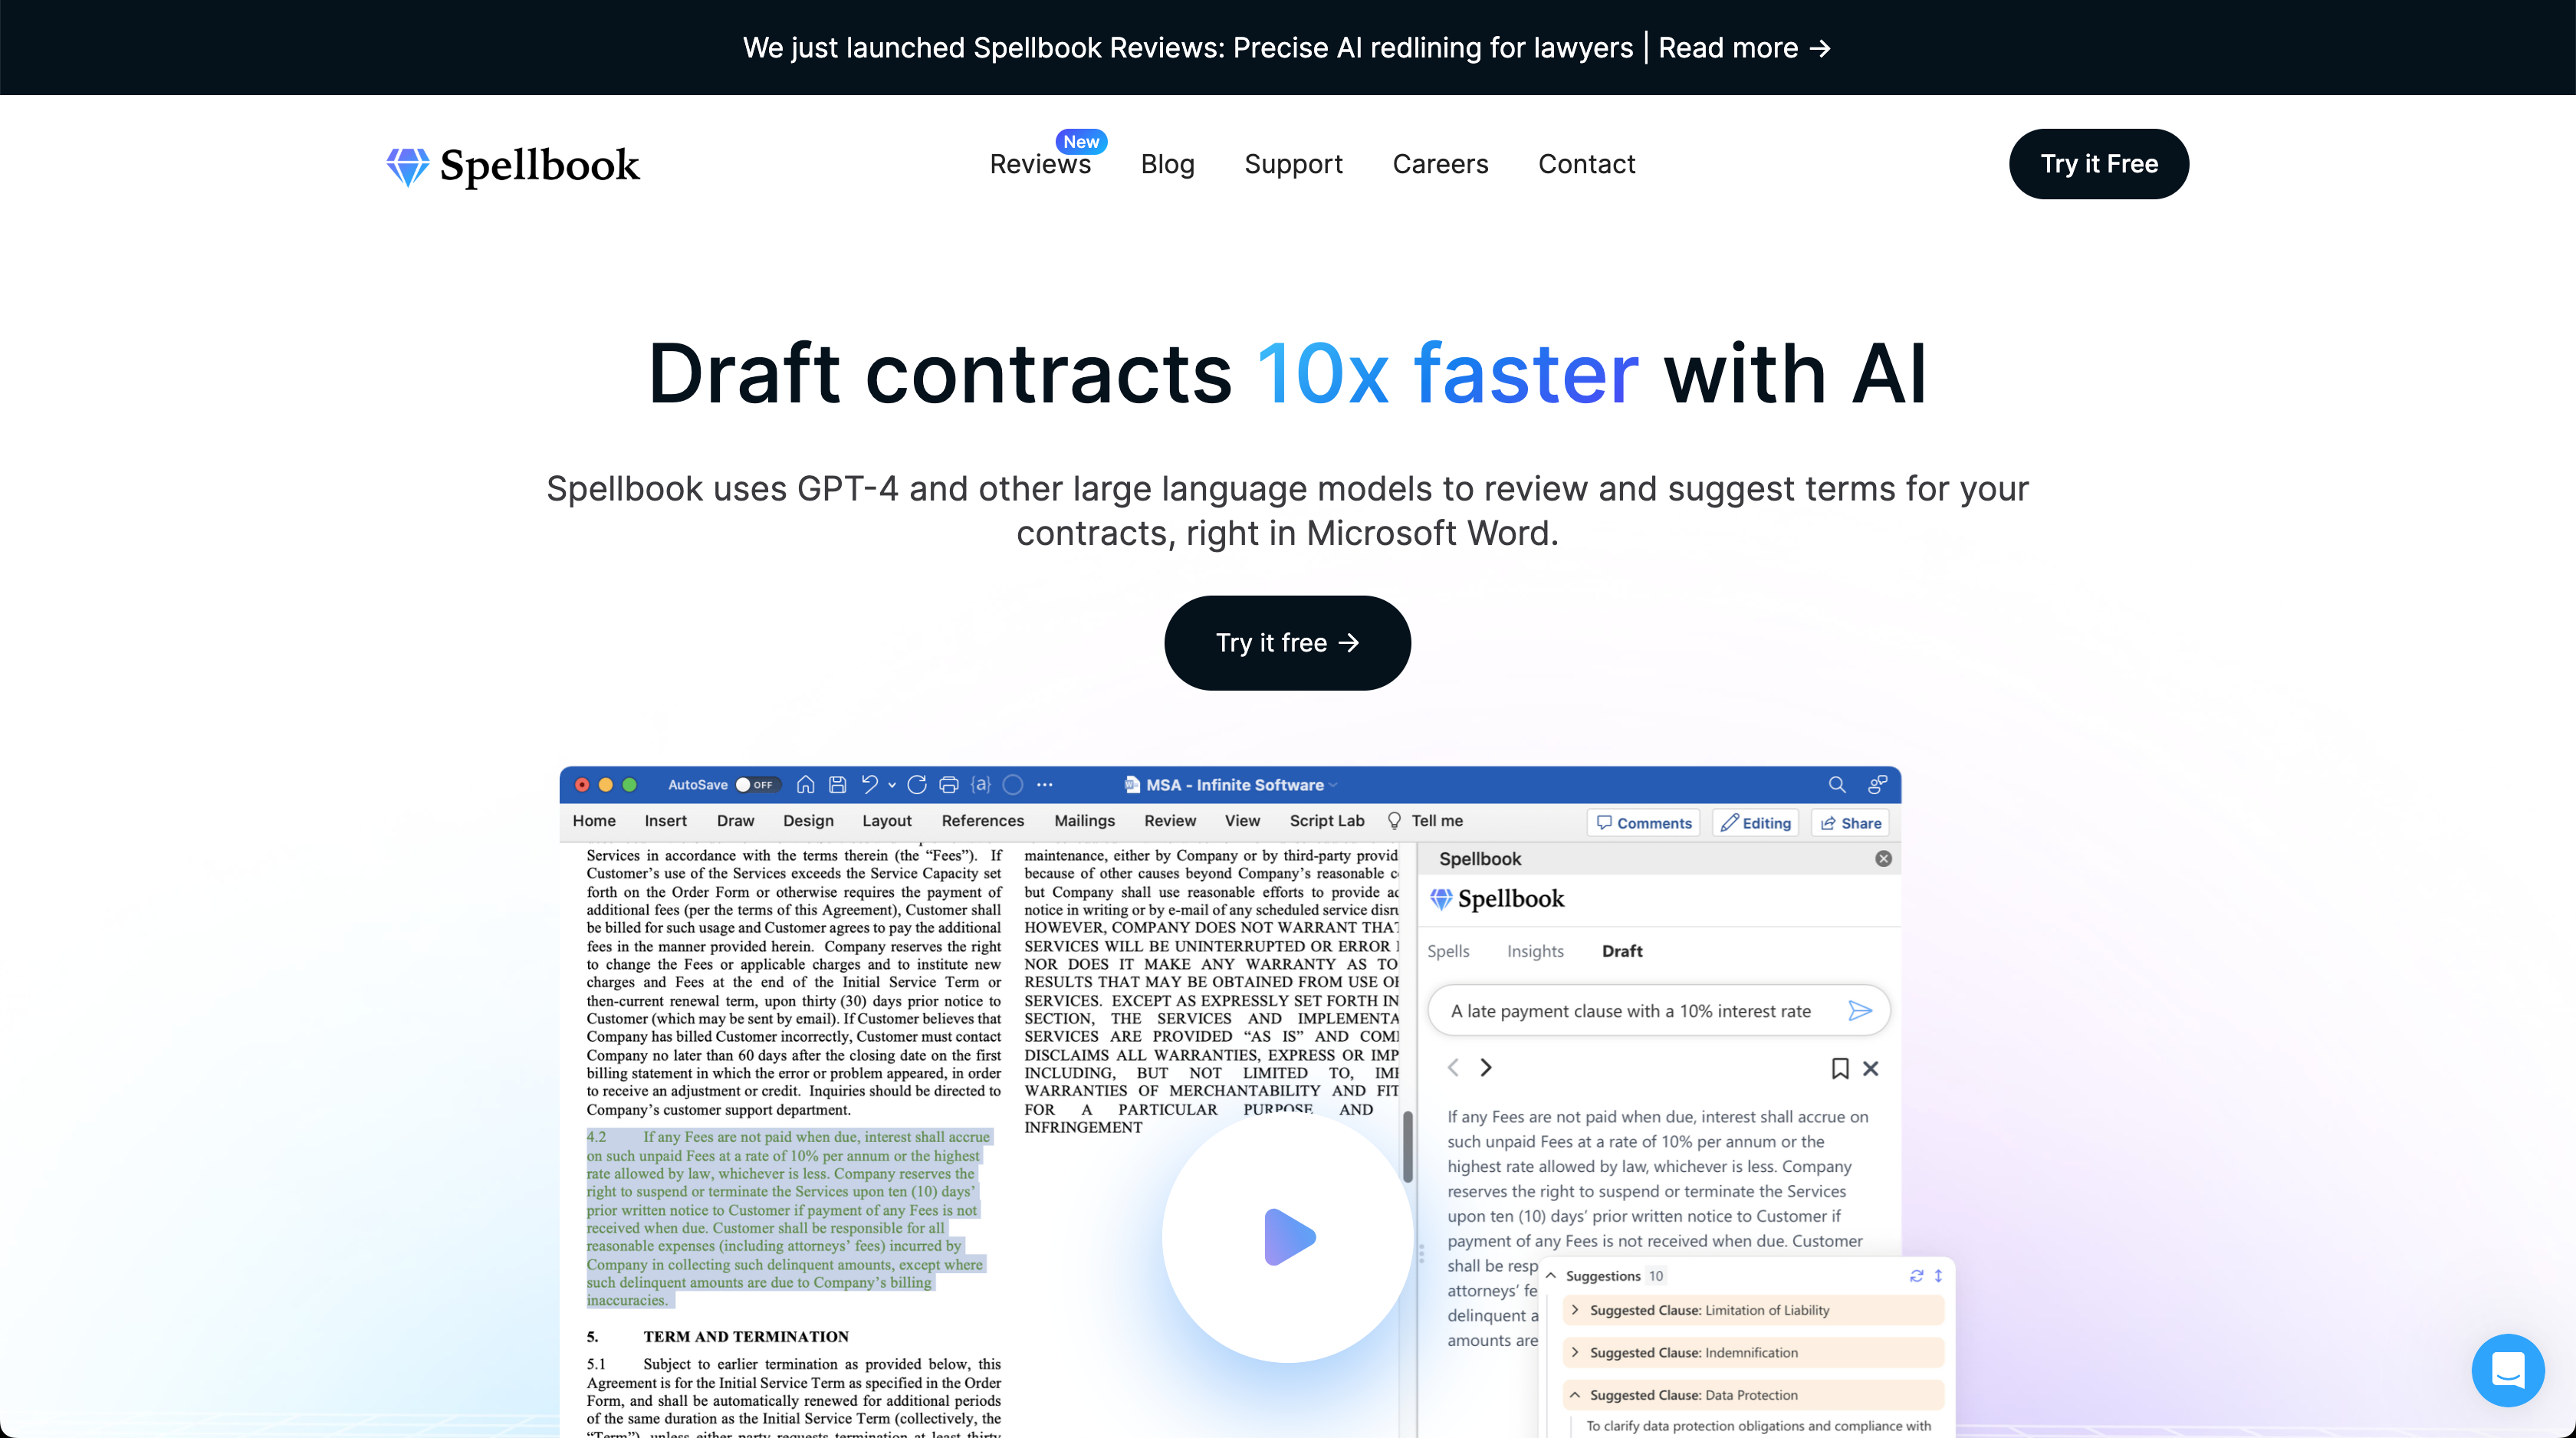 Speed Up Contract Drafting with Precision AI